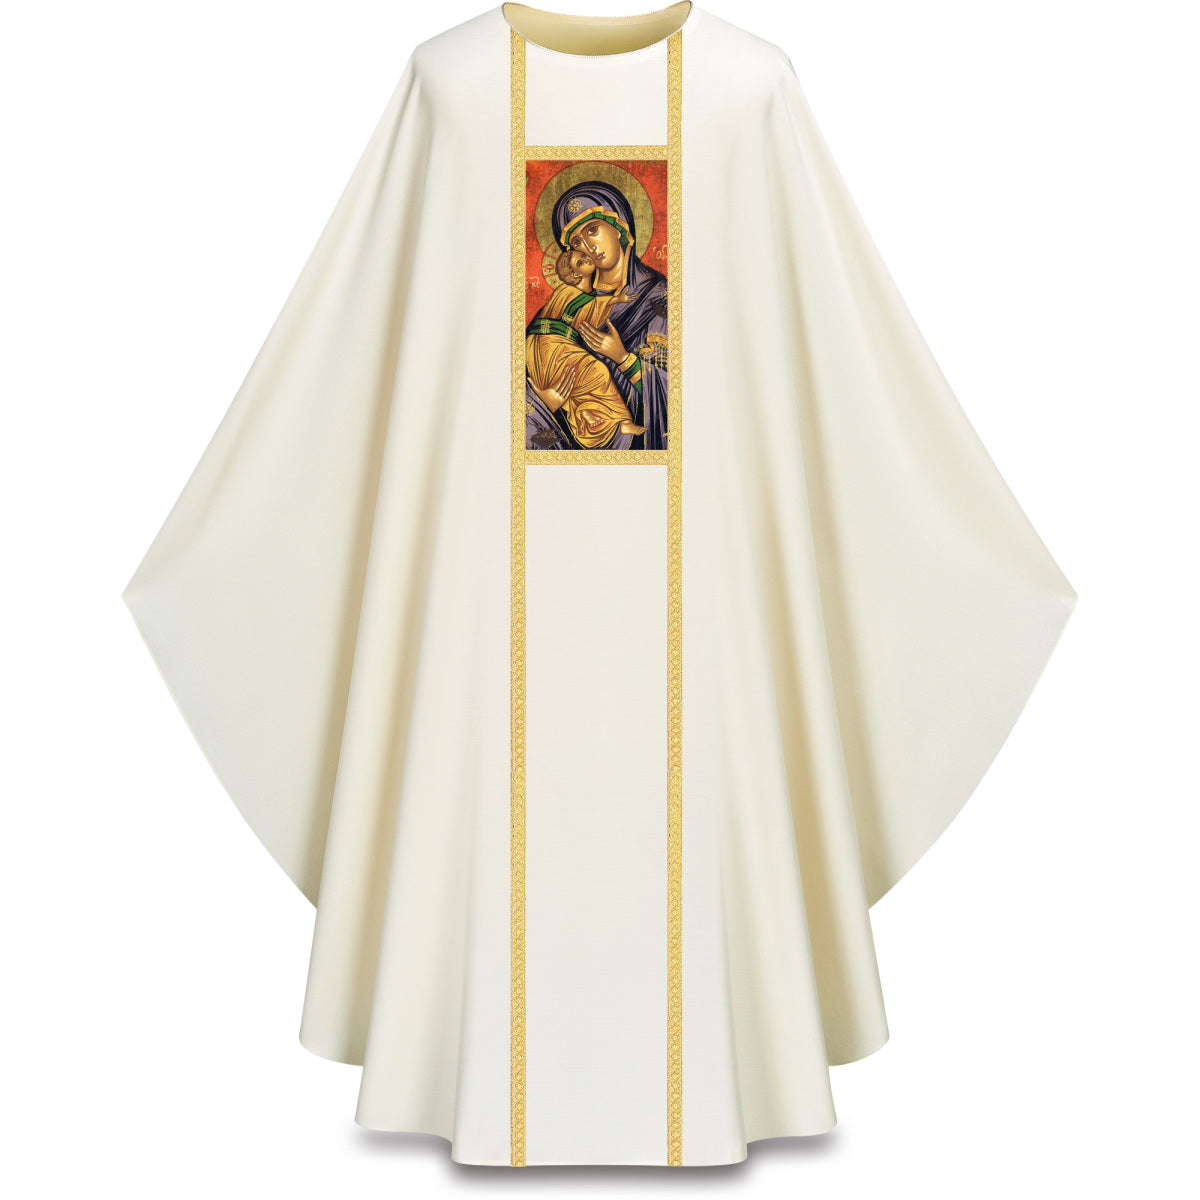 Our Lady of Perpetual Help Chasuble